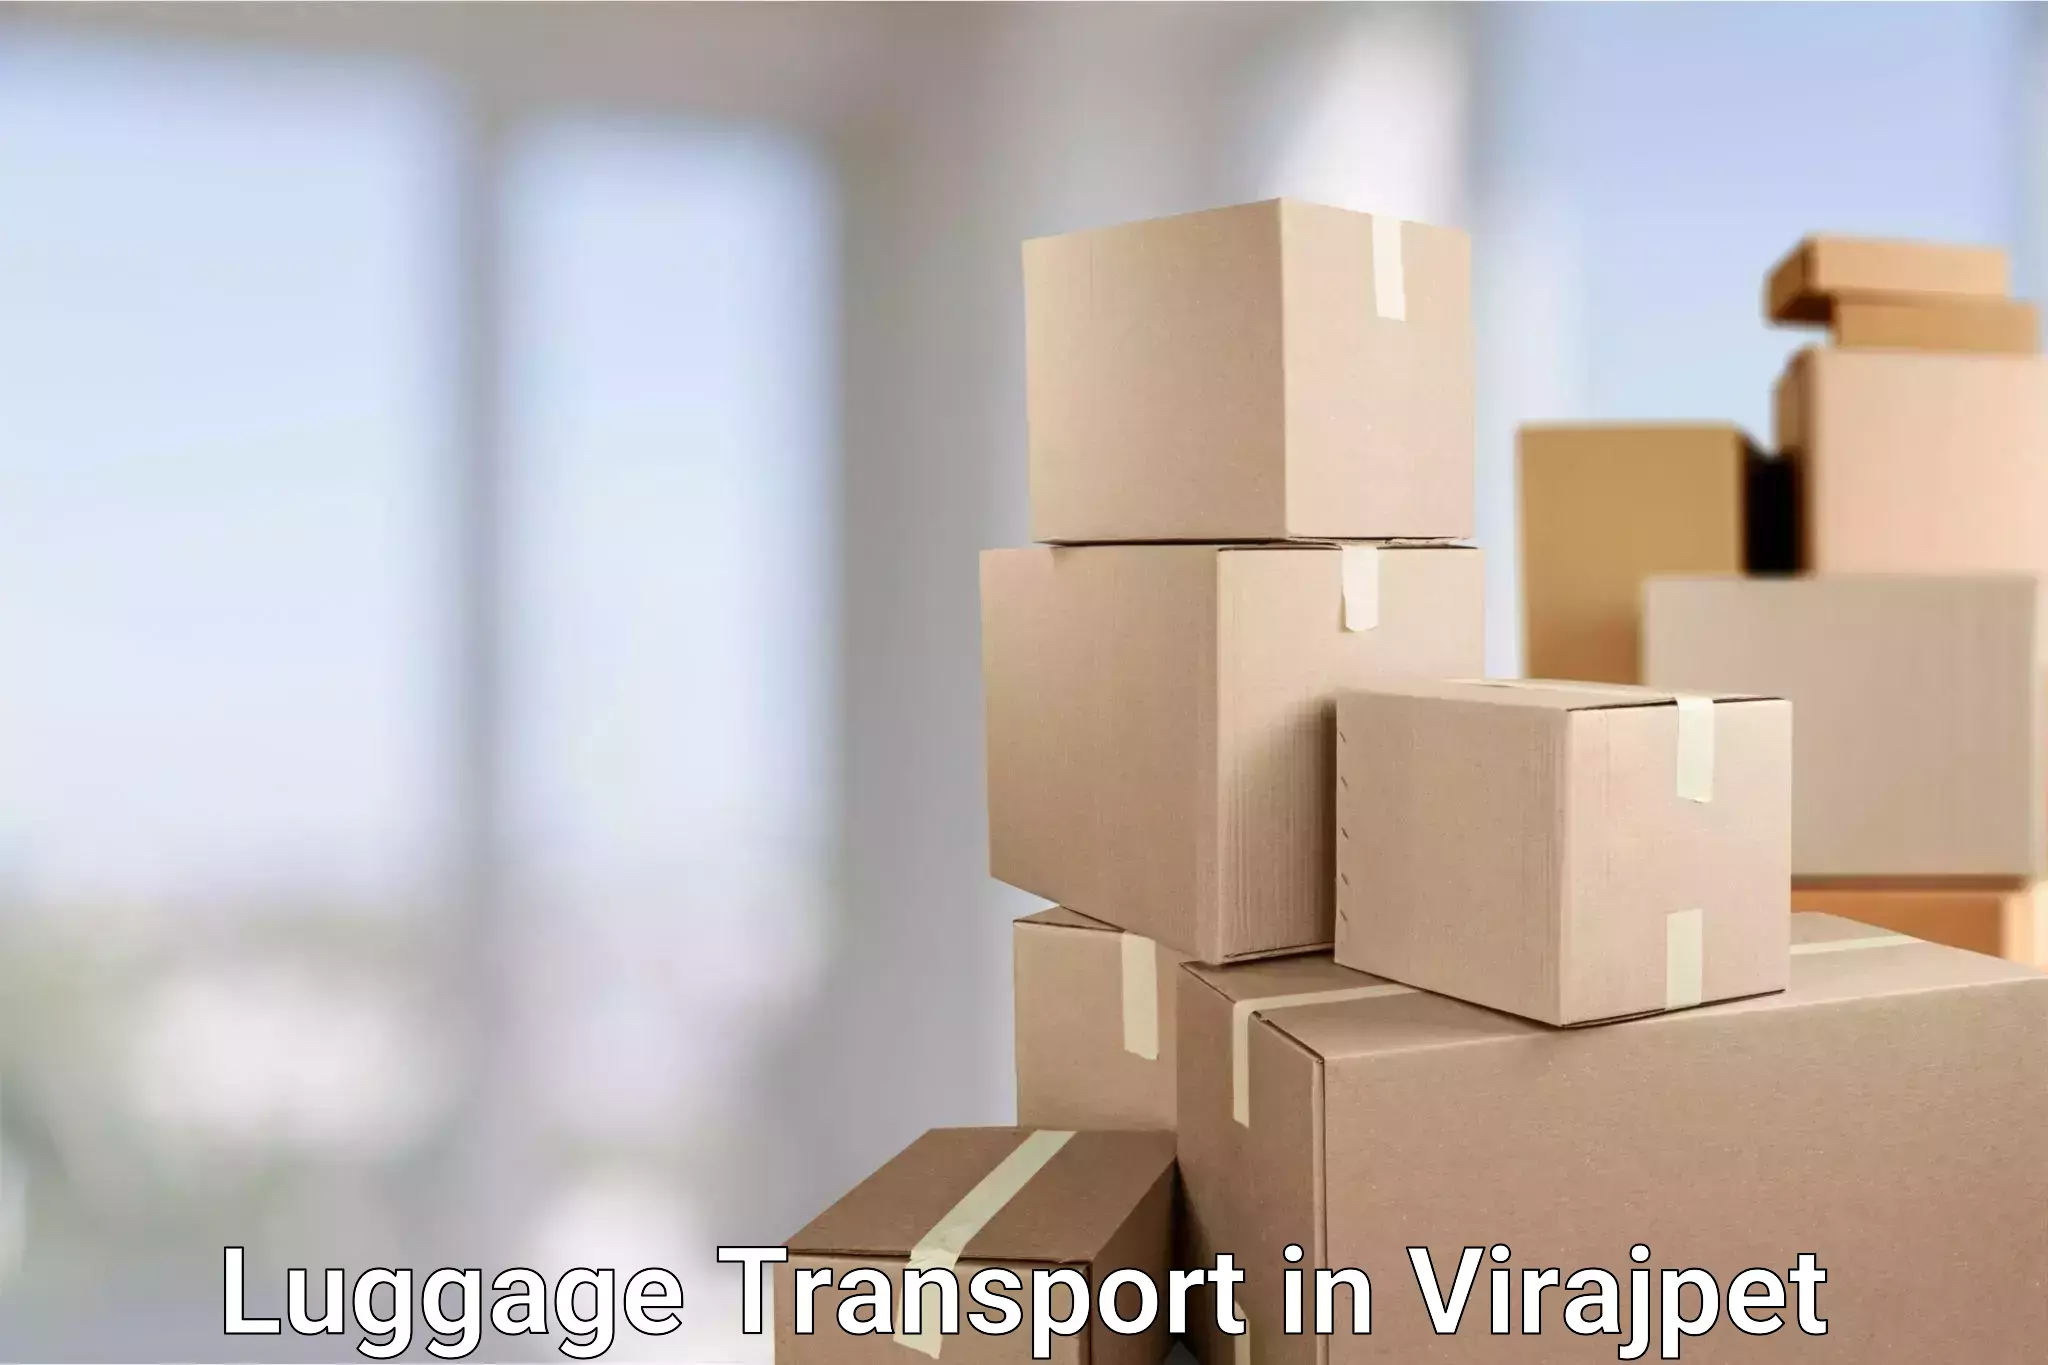 Heavy luggage shipping in Virajpet